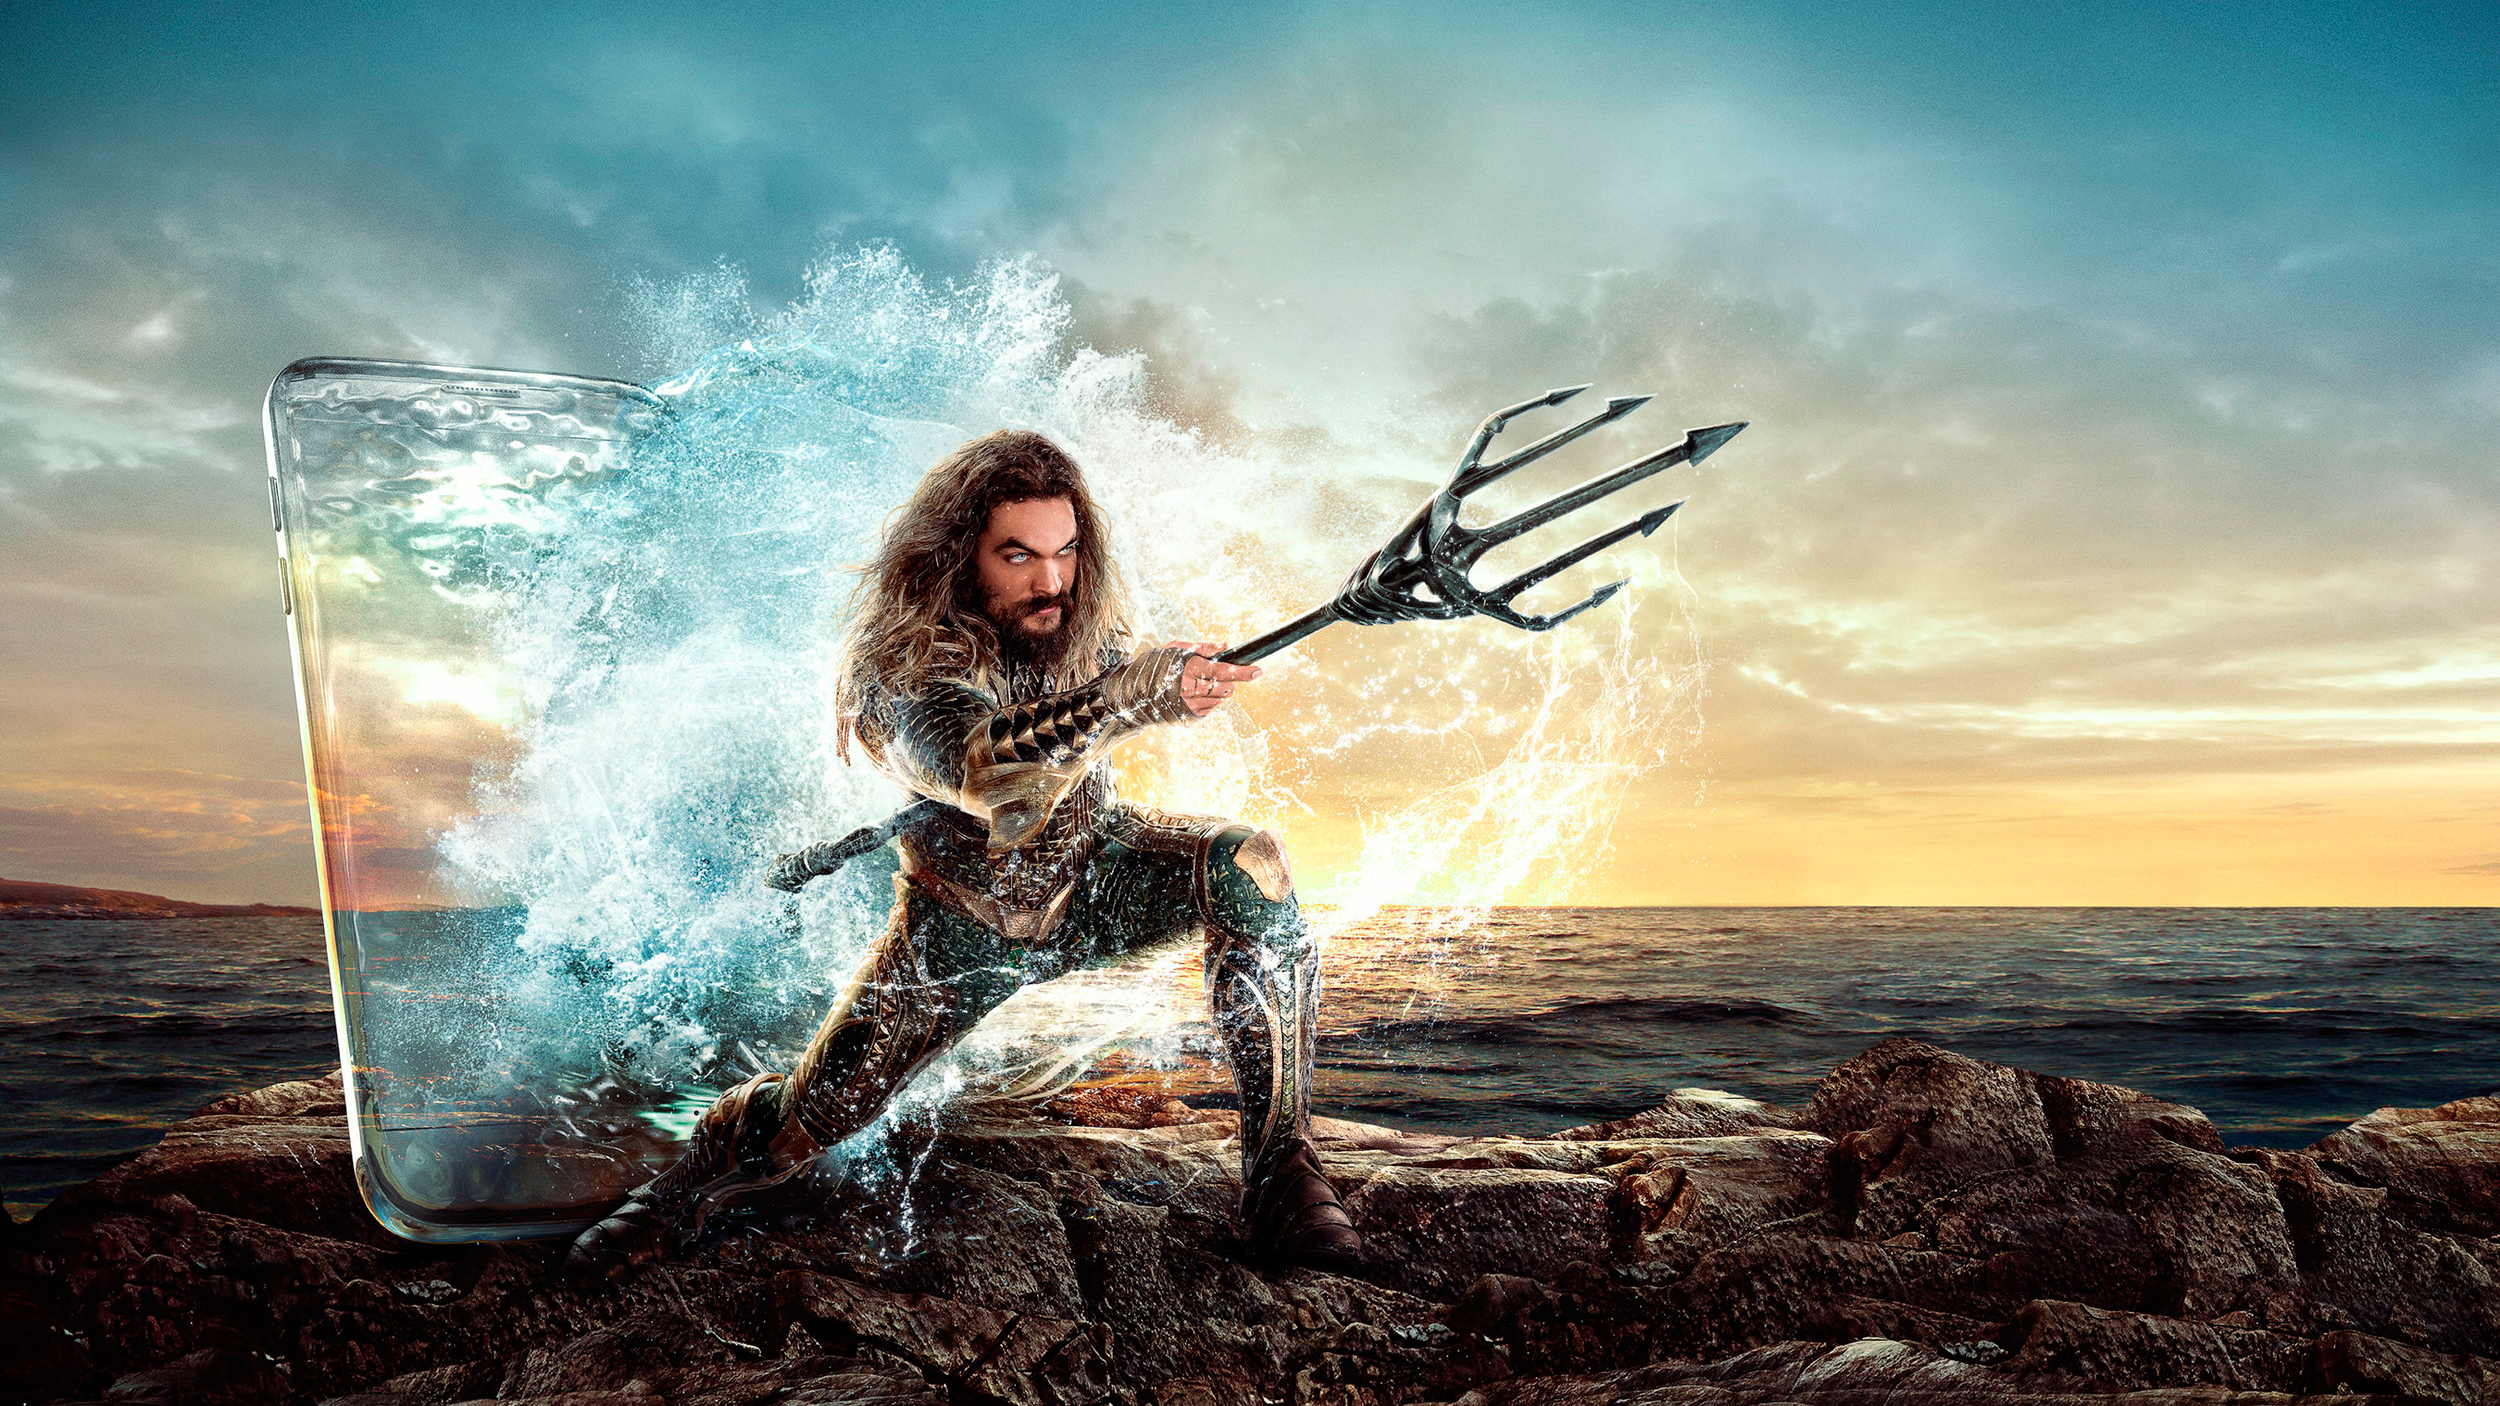 where can i download aquaman movie free